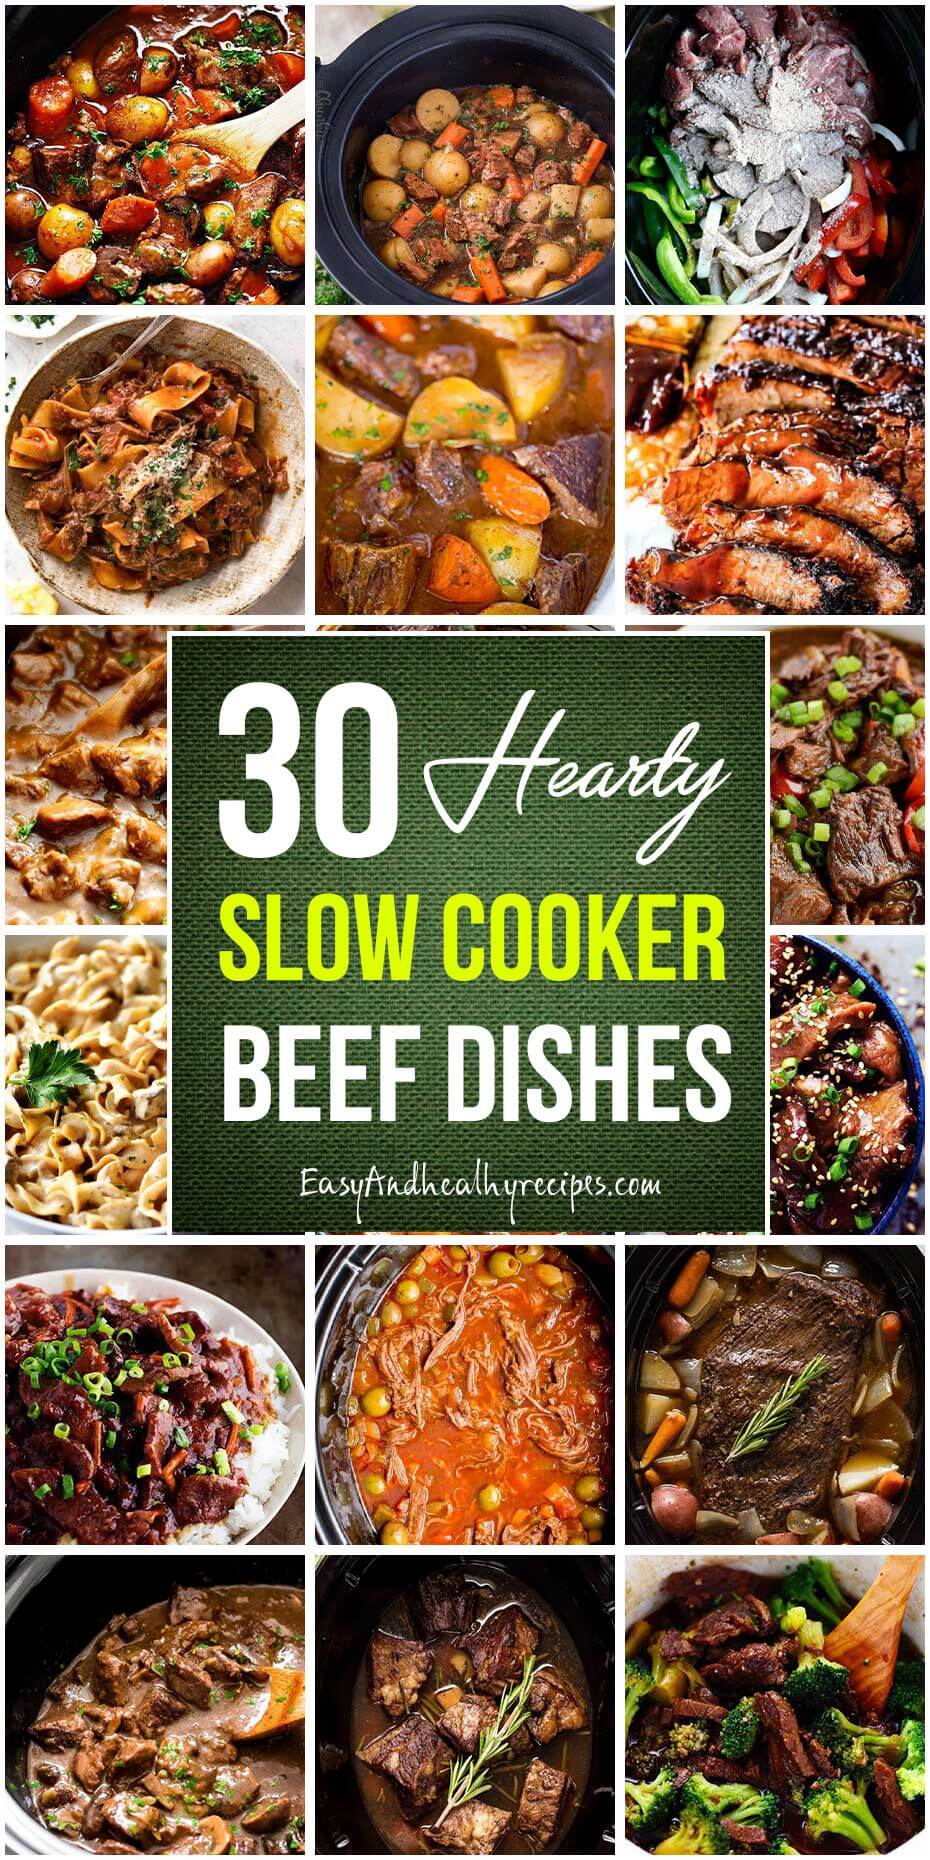 30 Best Slow Cooker Beef Dishes You Should Try